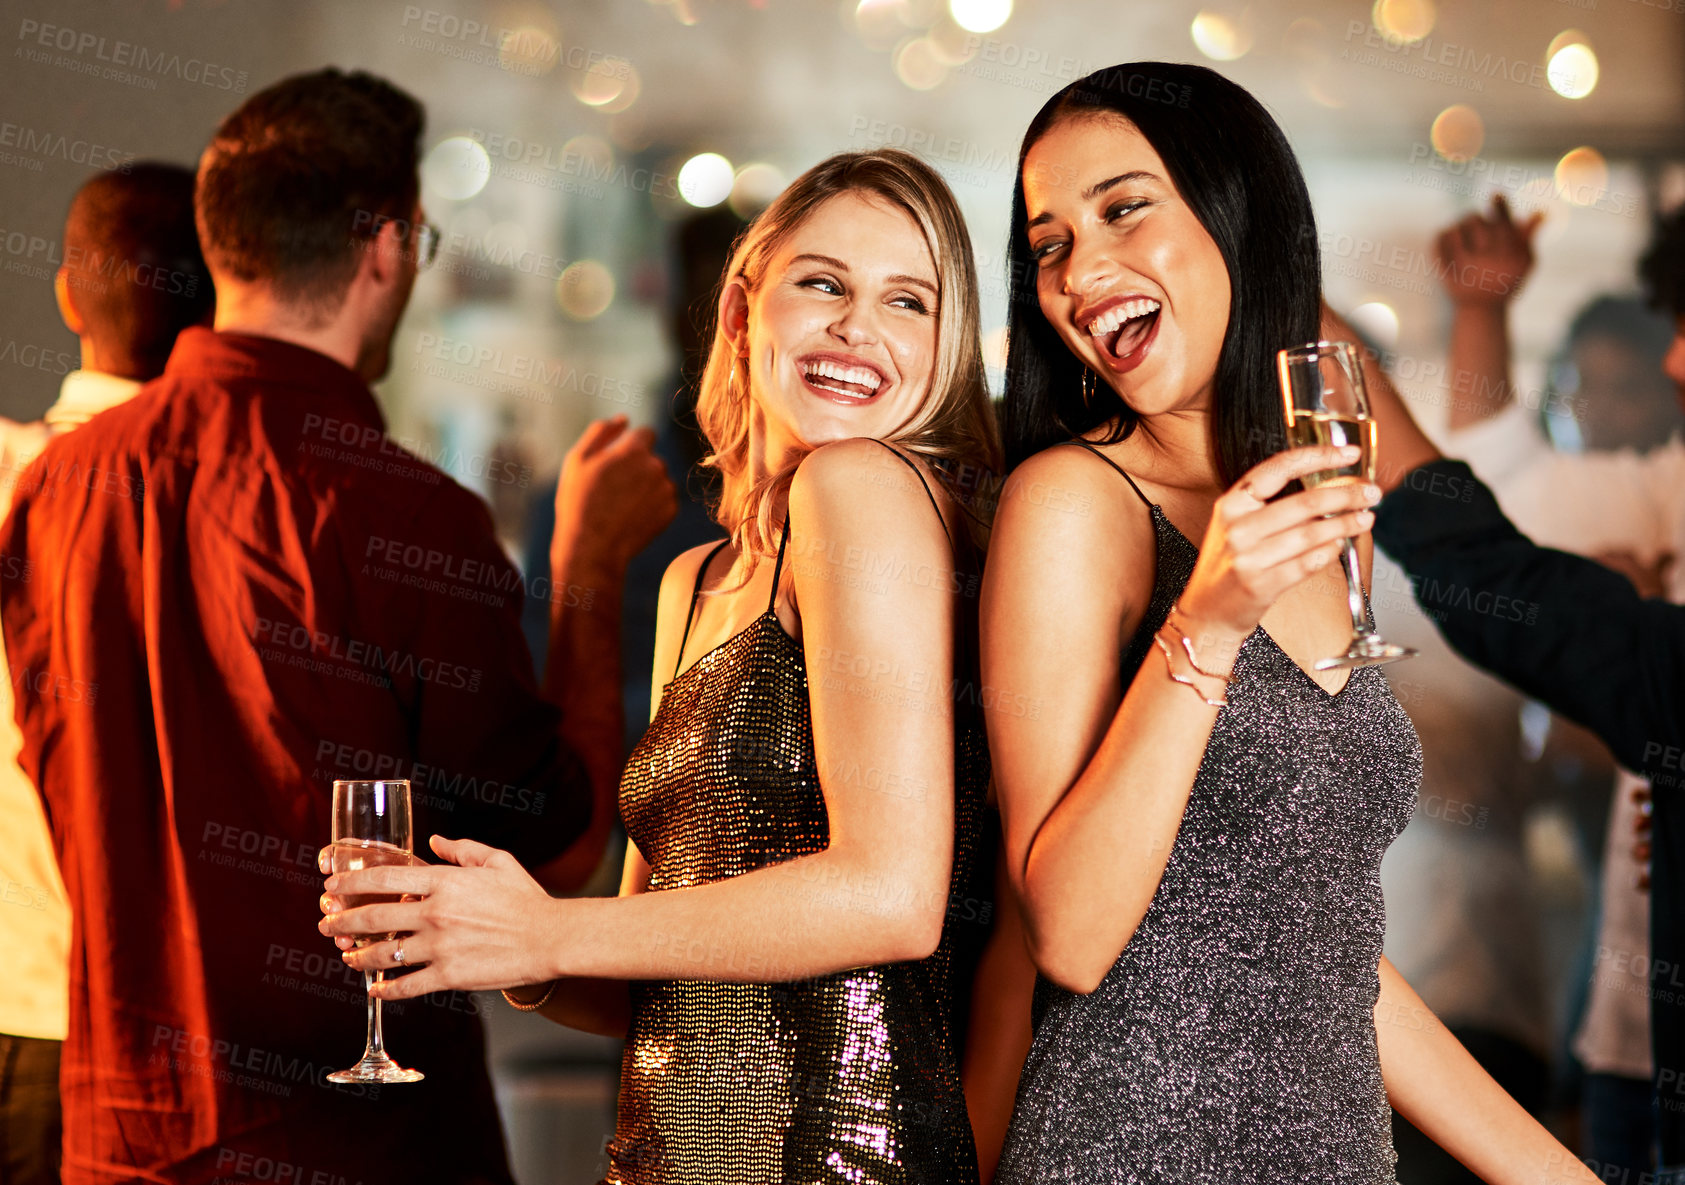 Buy stock photo Women, bonding or dancing with champagne glasses in nightclub event, birthday party or New Year celebration in London. Smile, happy or laughing friends with alcohol drinks in social gathering dance